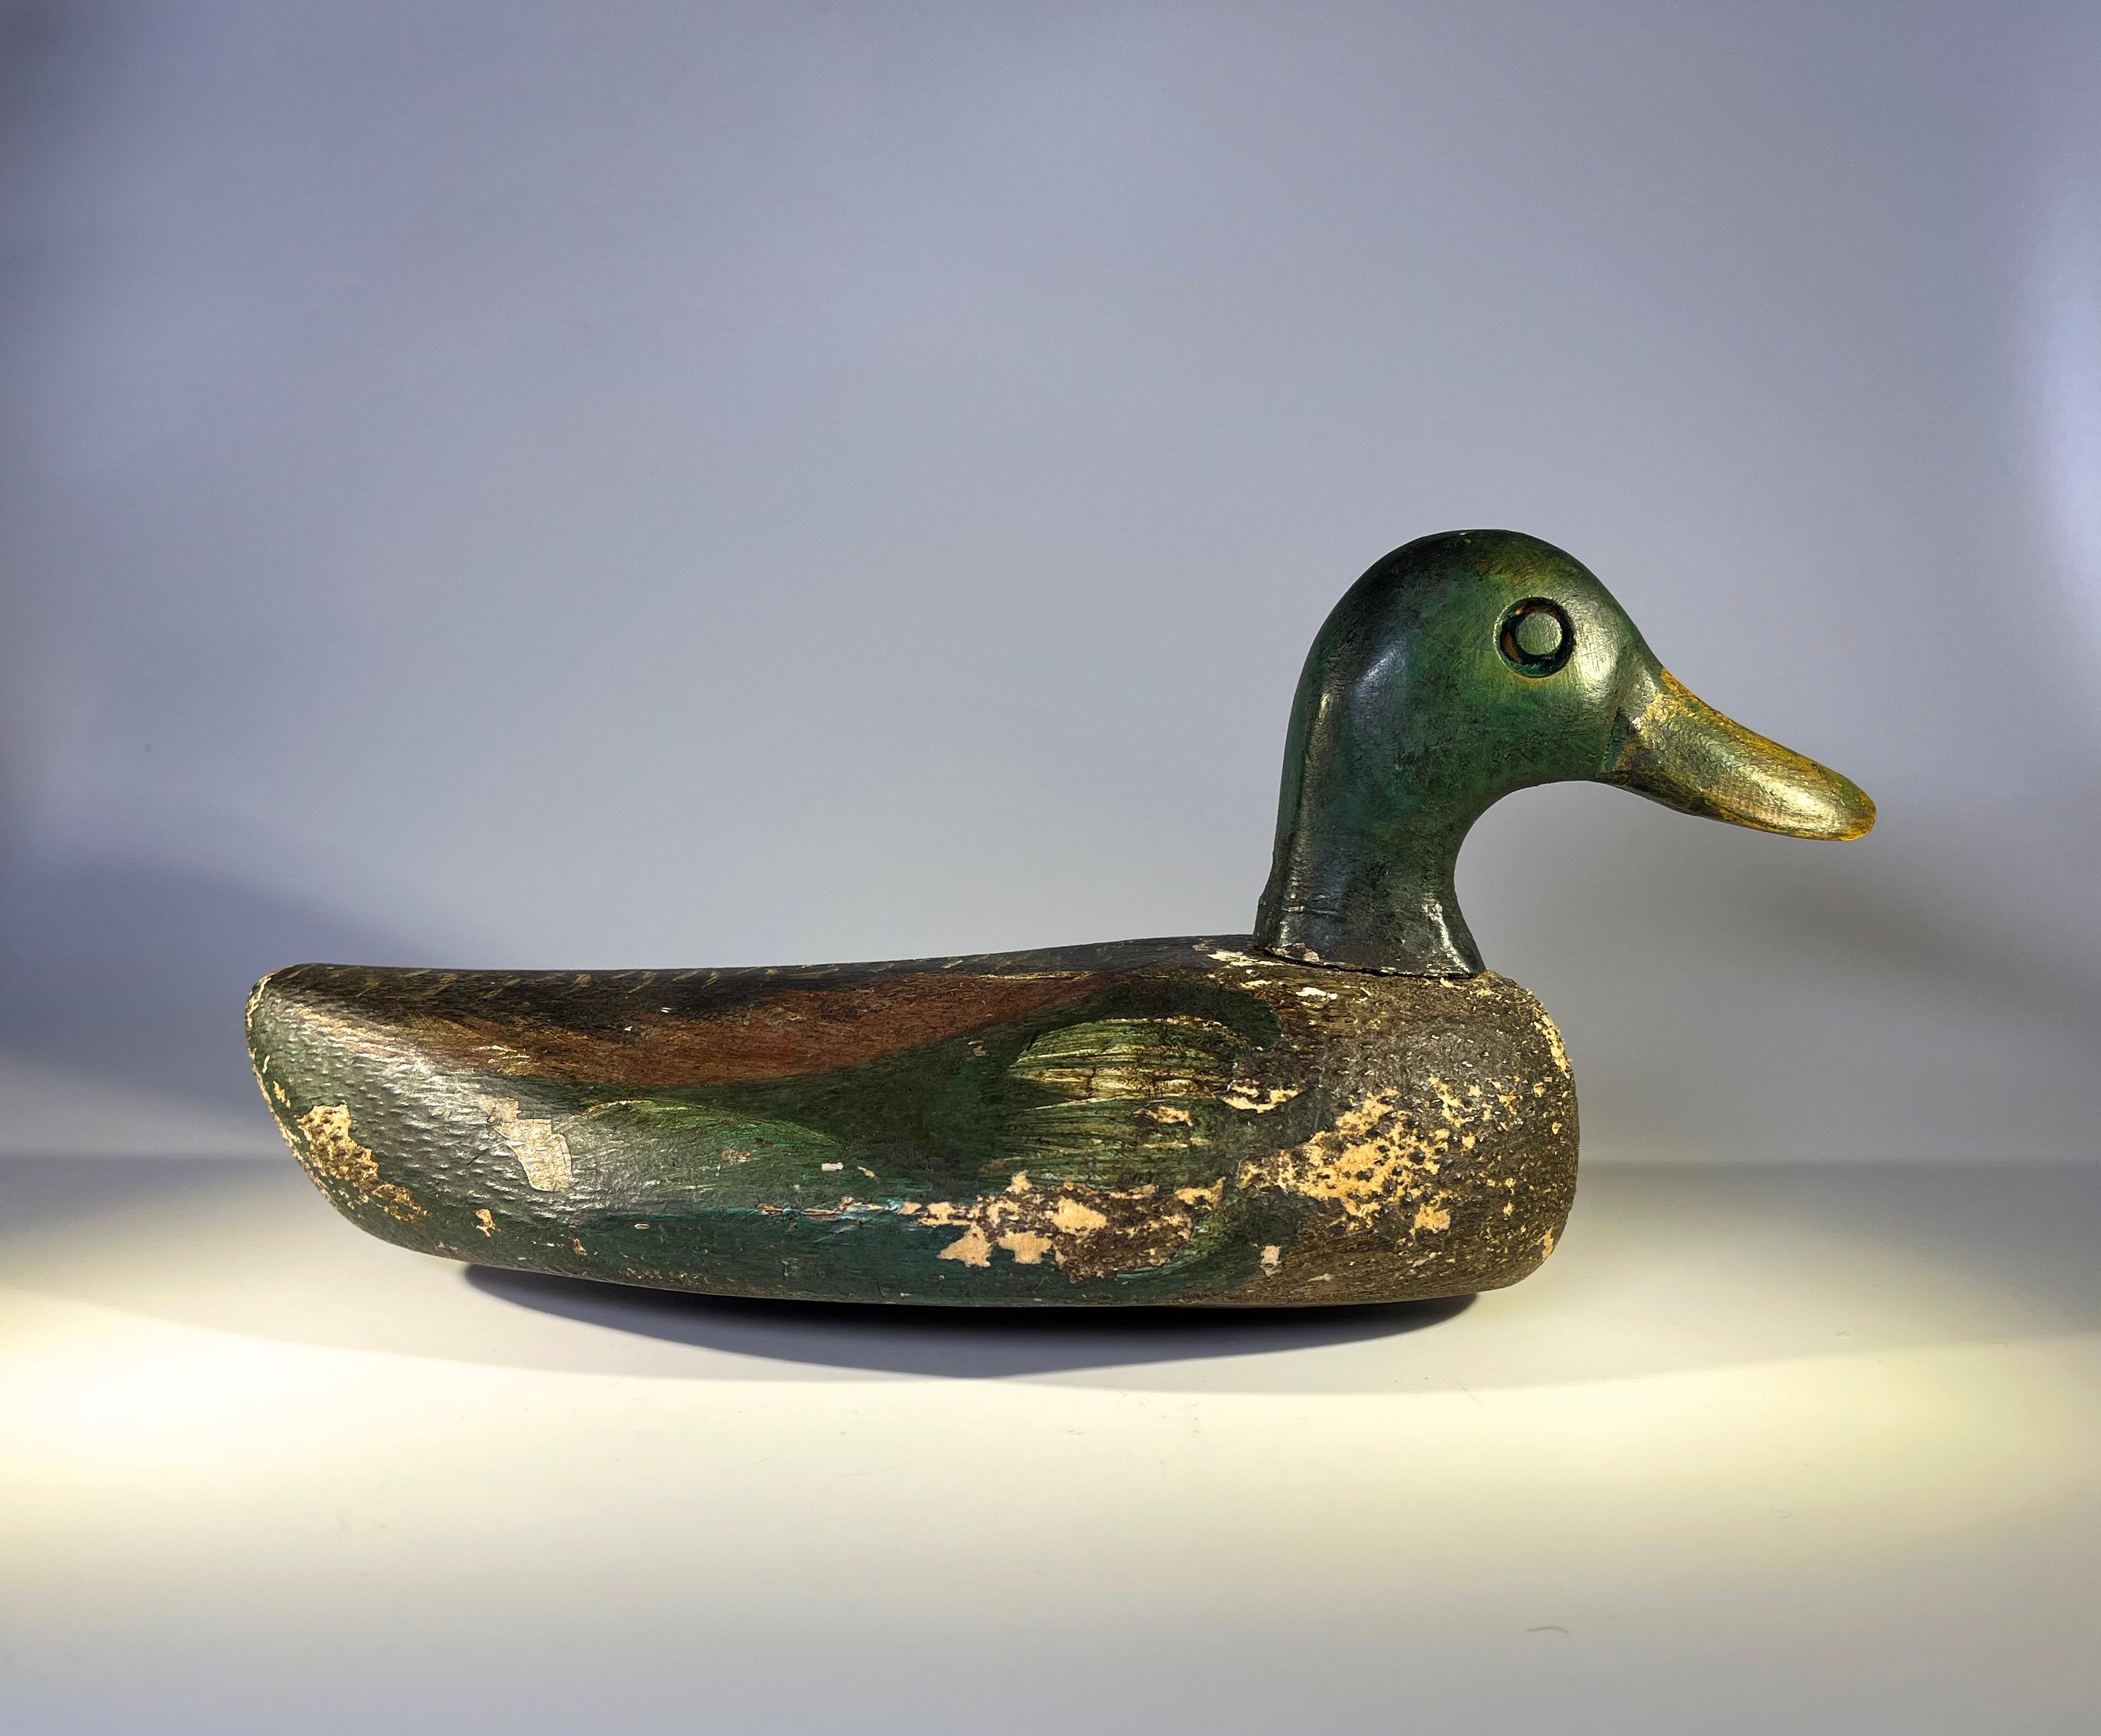 Antique English wood and cork Mallard drake decoy with original paint.
Hand crafted in England.
Lightweight, with impressionistic shape and form.
Circa early 20th century.
Tip of beak to tail 11 inch, width across body 4.5 inch, height 5